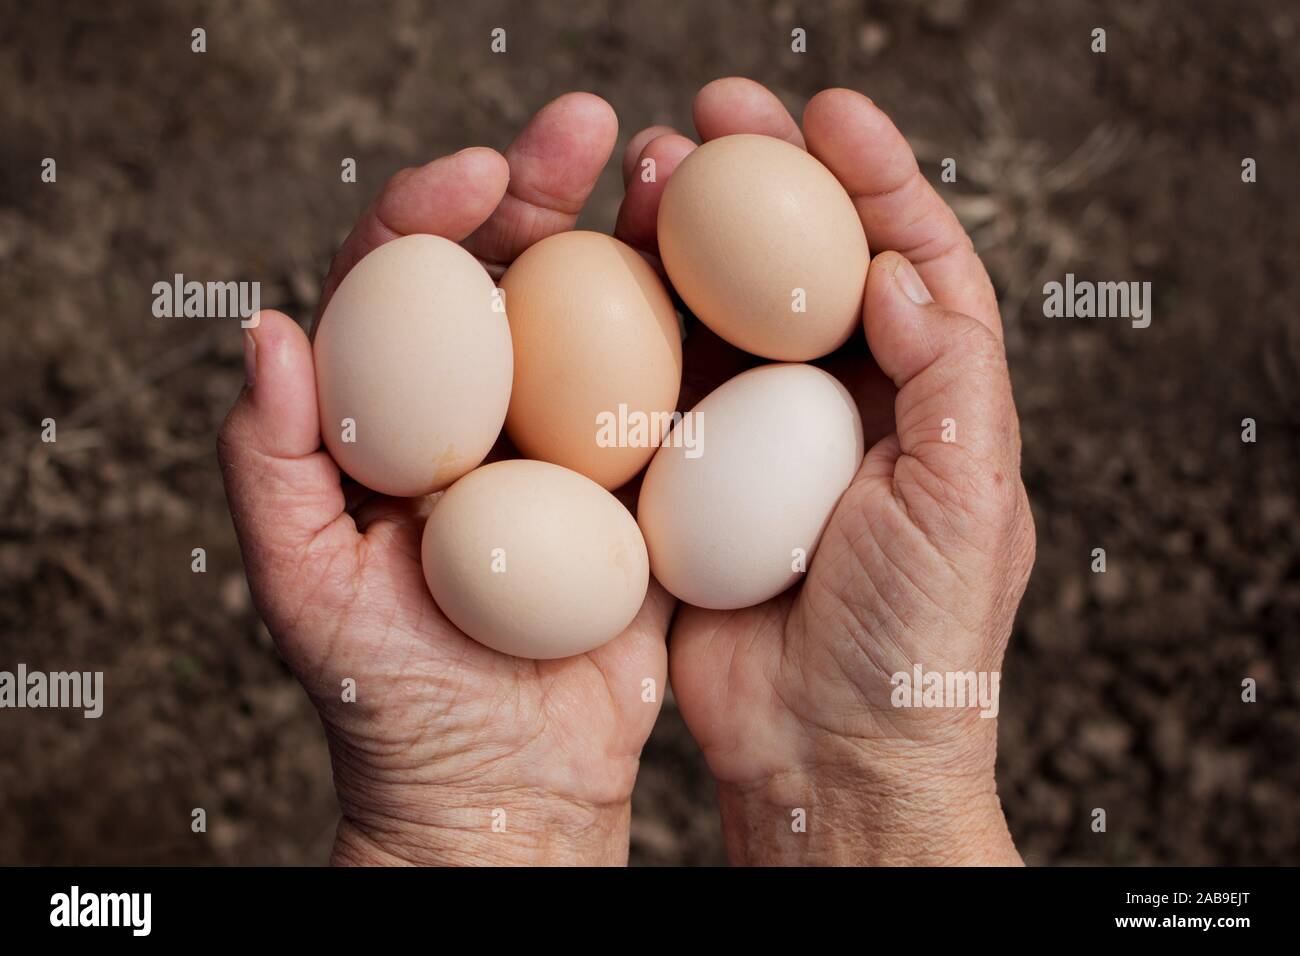 Grandmother Holds Eggs in Hands. Domestic, Organic, Natural Products and Lifestyle. Stock Photo